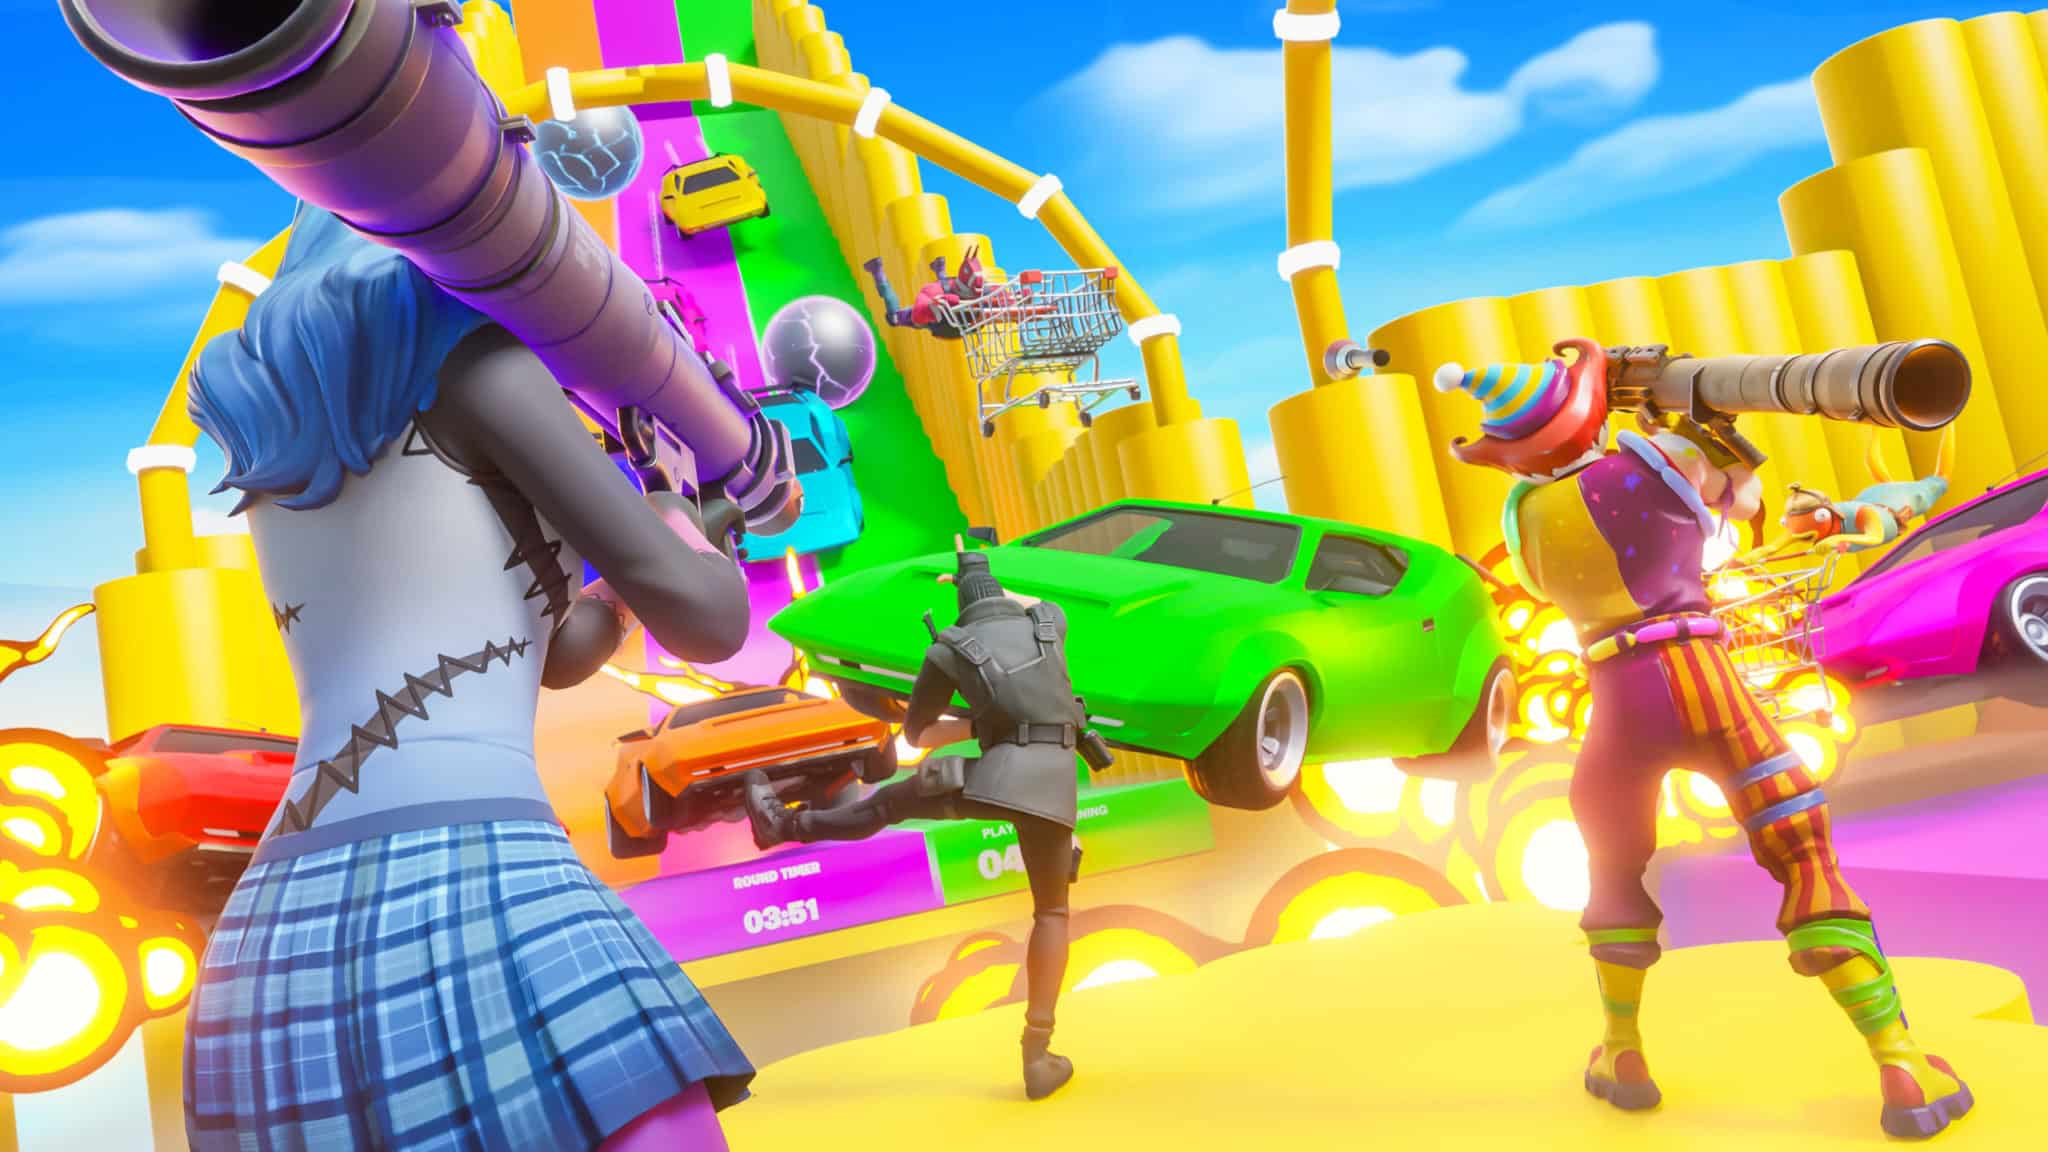 Fortnite Creative mode rips off Roblox's Brookhaven and fans can't